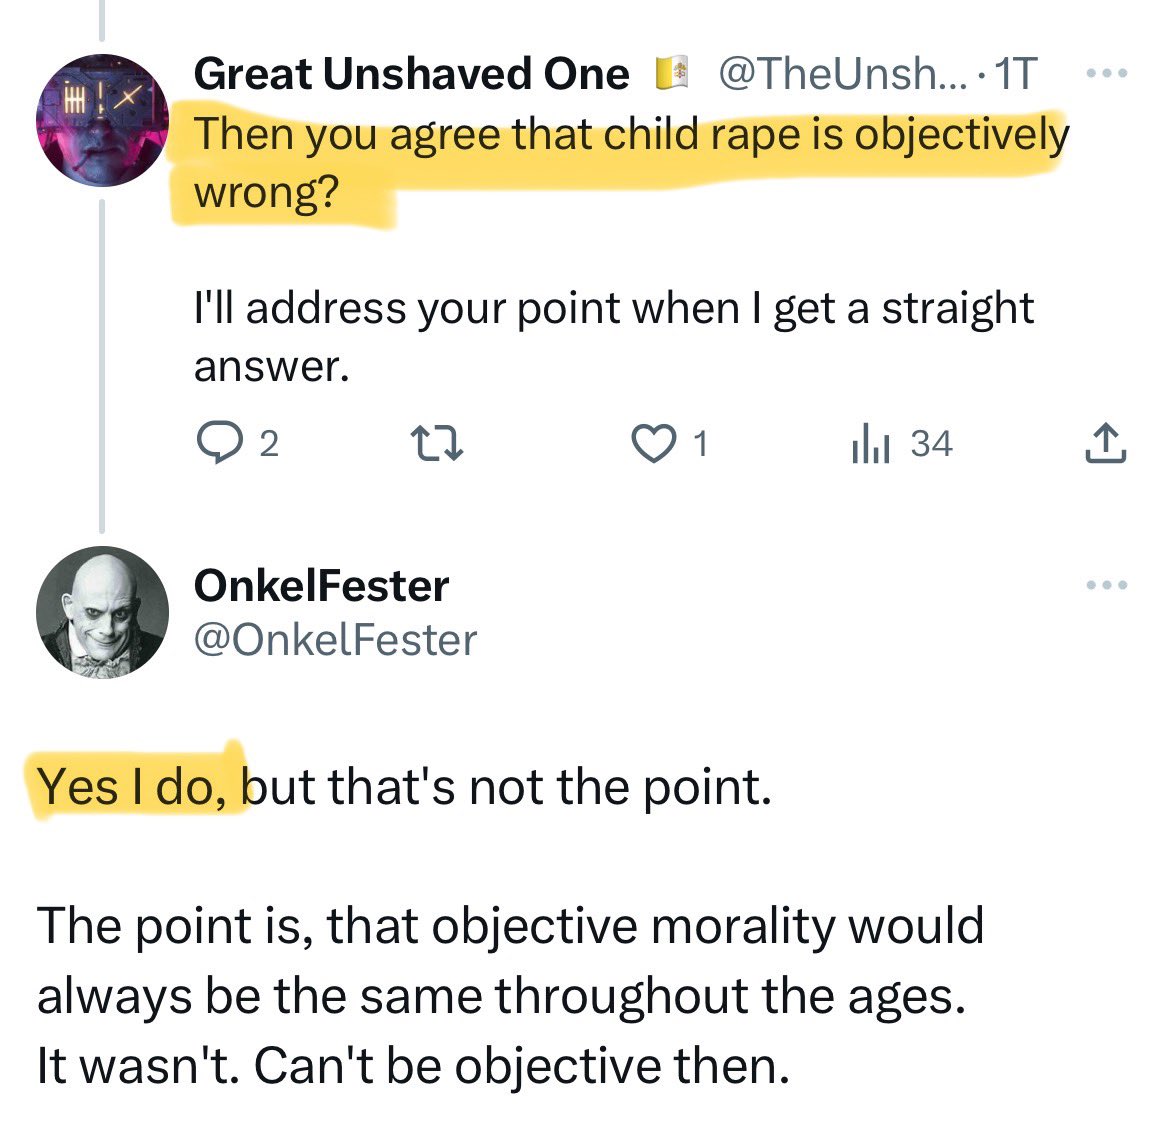 A blatantly lying follower of god claiming to be more moral than an atheist. Can’t make this up.